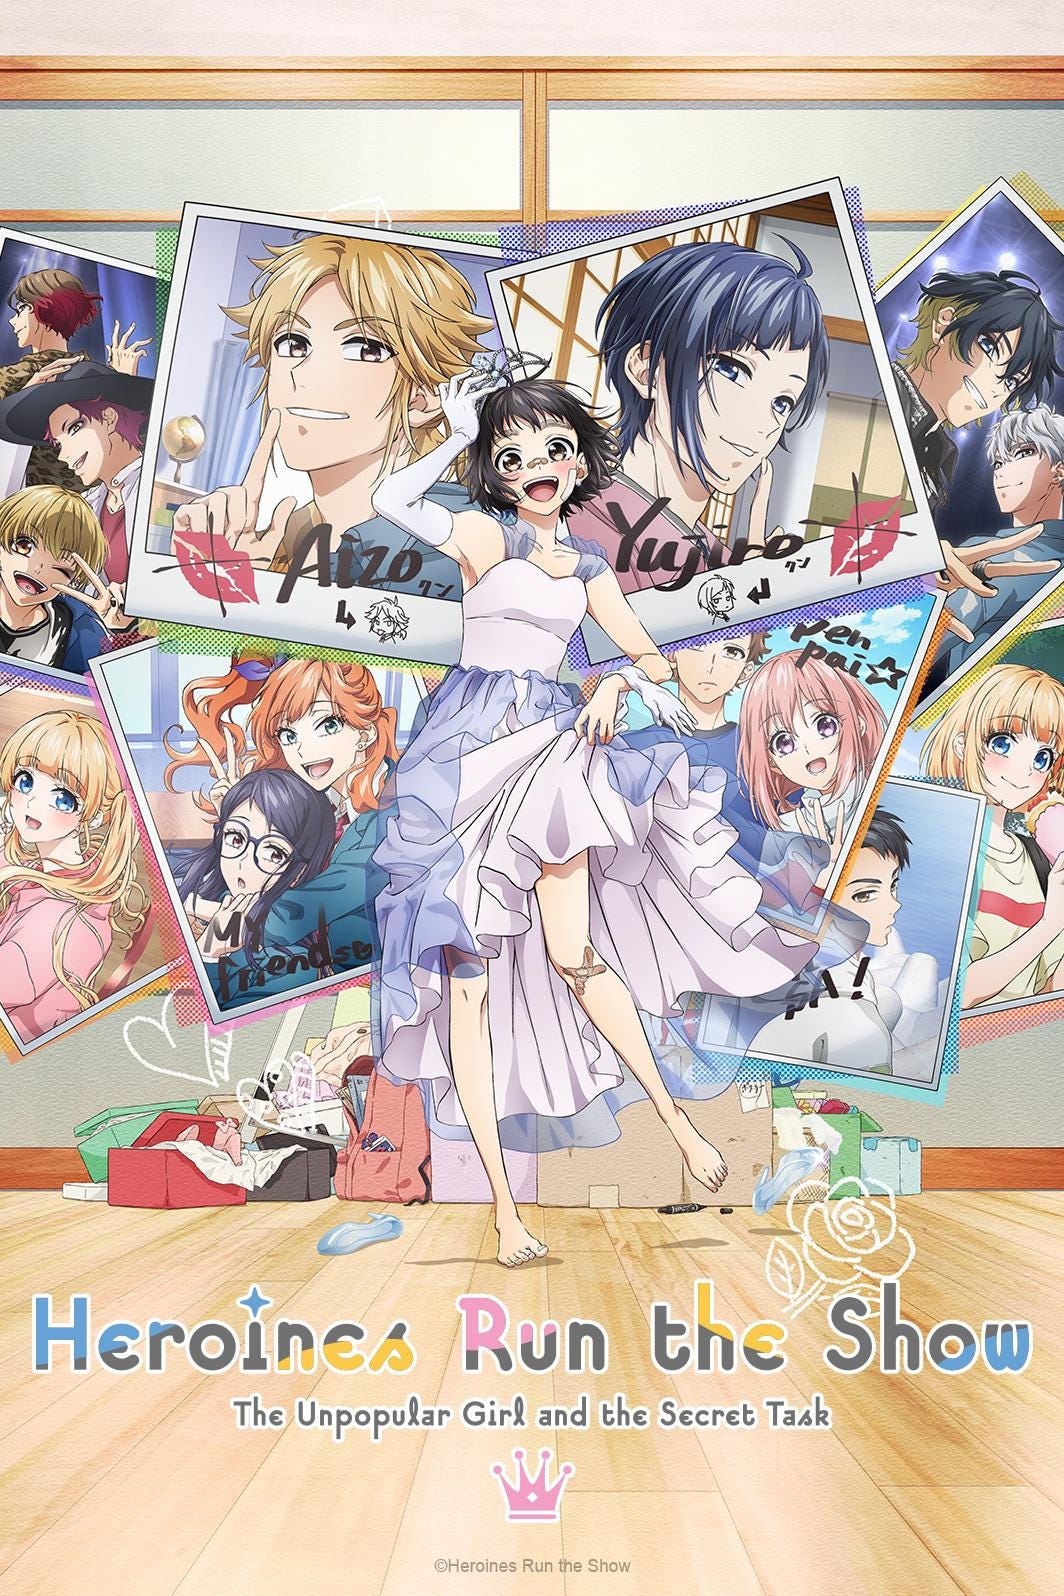 Title poster of "Heroines Run the Show" courtesy of Crunchyroll.